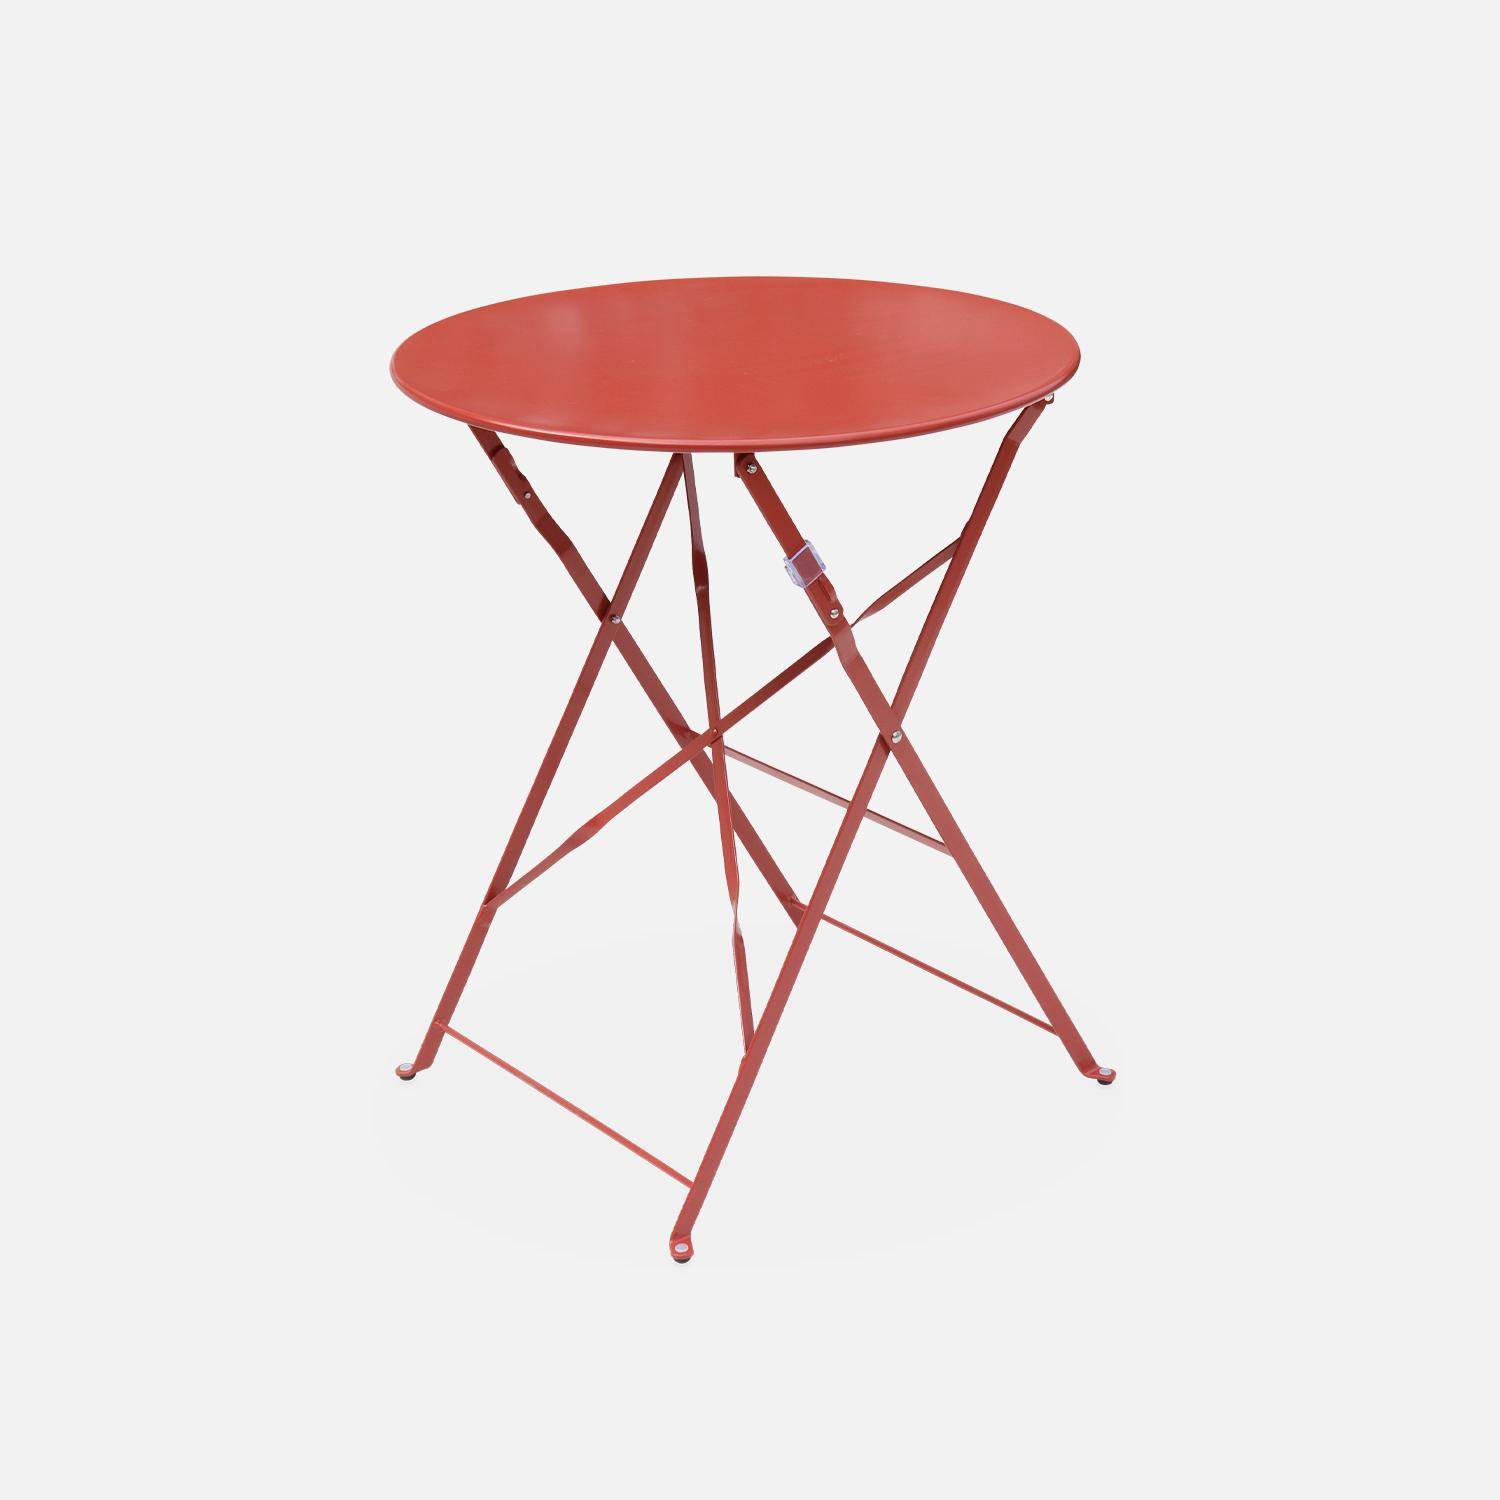 Foldable bistro garden table - Round Emilia terracota - Round table Ø60cm, thermo-lacquered steel,sweeek,Photo3